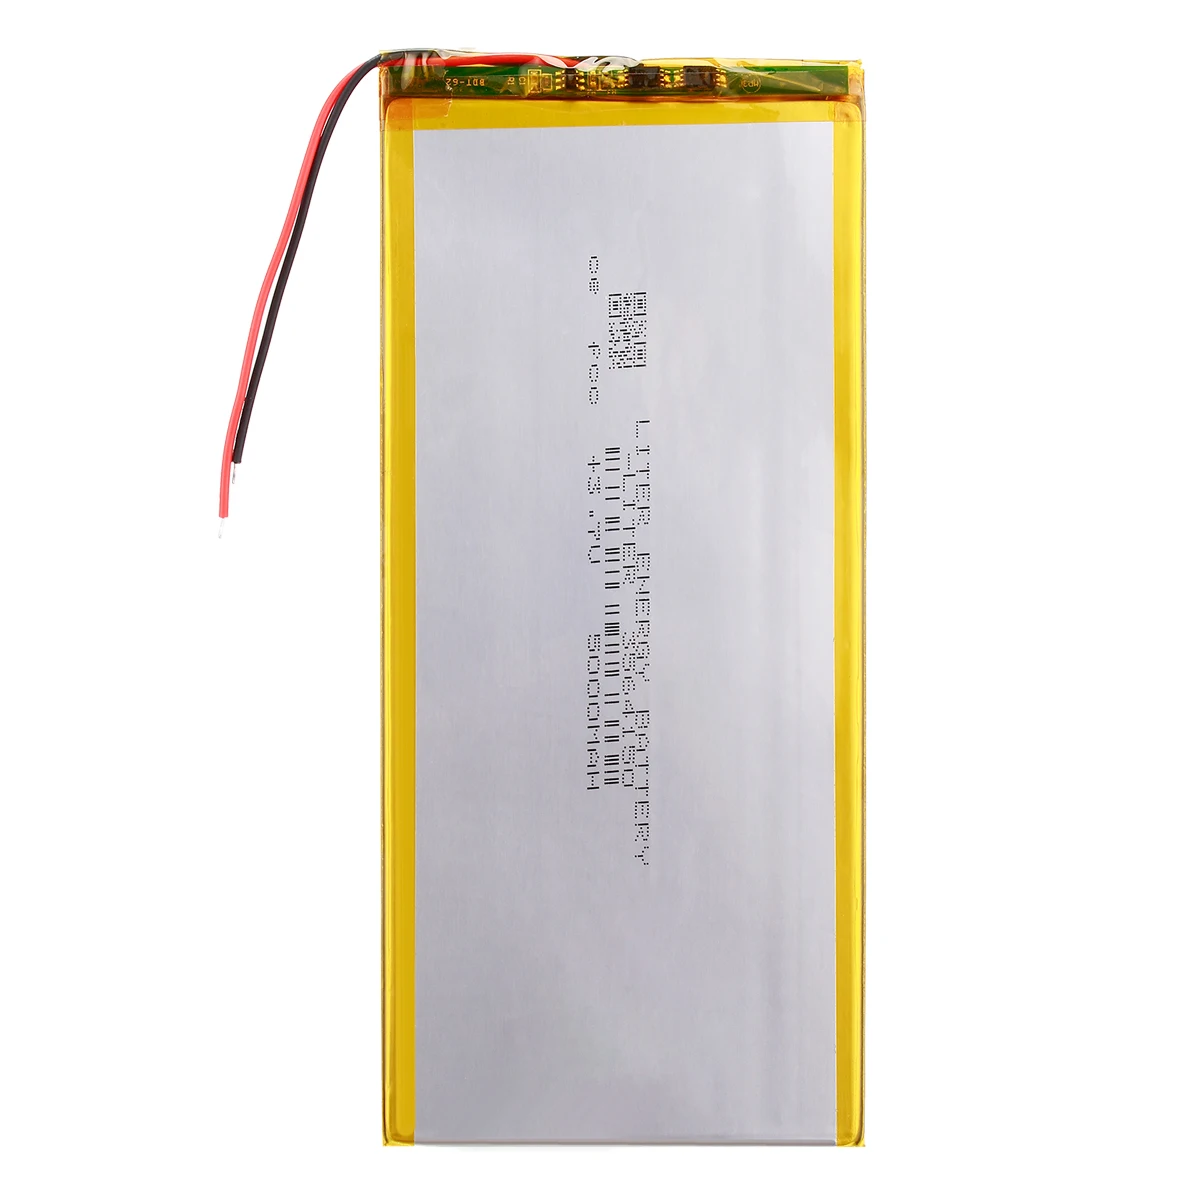 Liter energy battery 3.7V,5000mAH 3564150 Polymer lithium ion battery for tablet pc,power bank,e-book;BL-T17 Digma plane